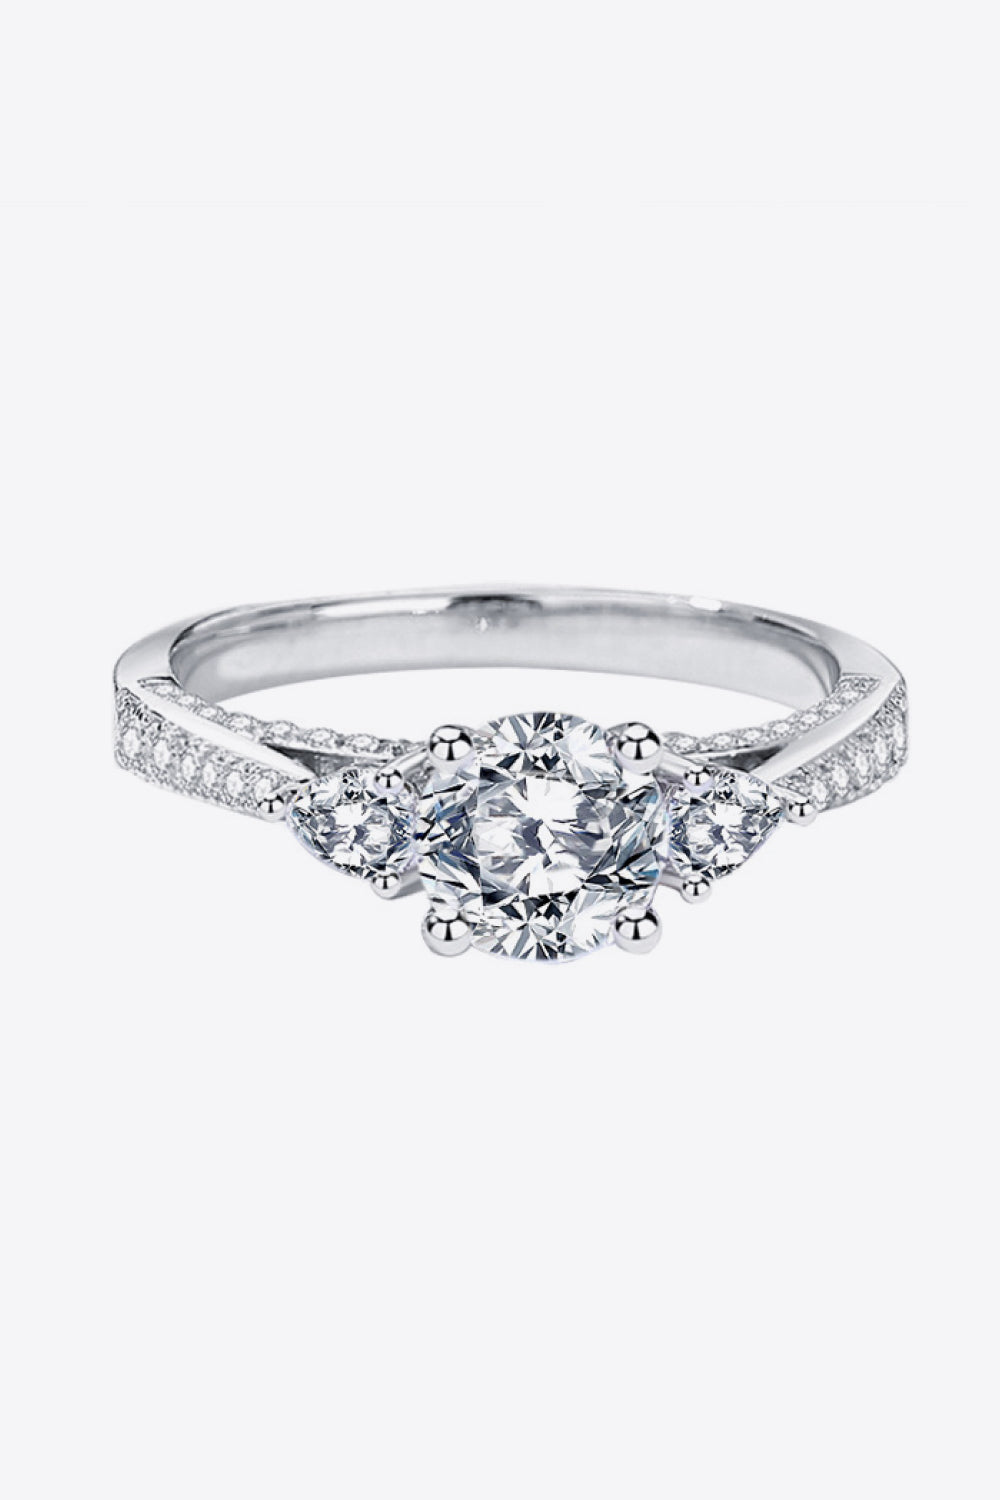 1 Carat Moissanite 4-Prong Side Stone Ring (Platinum Over Pure Sterling Silver) - Sparkala